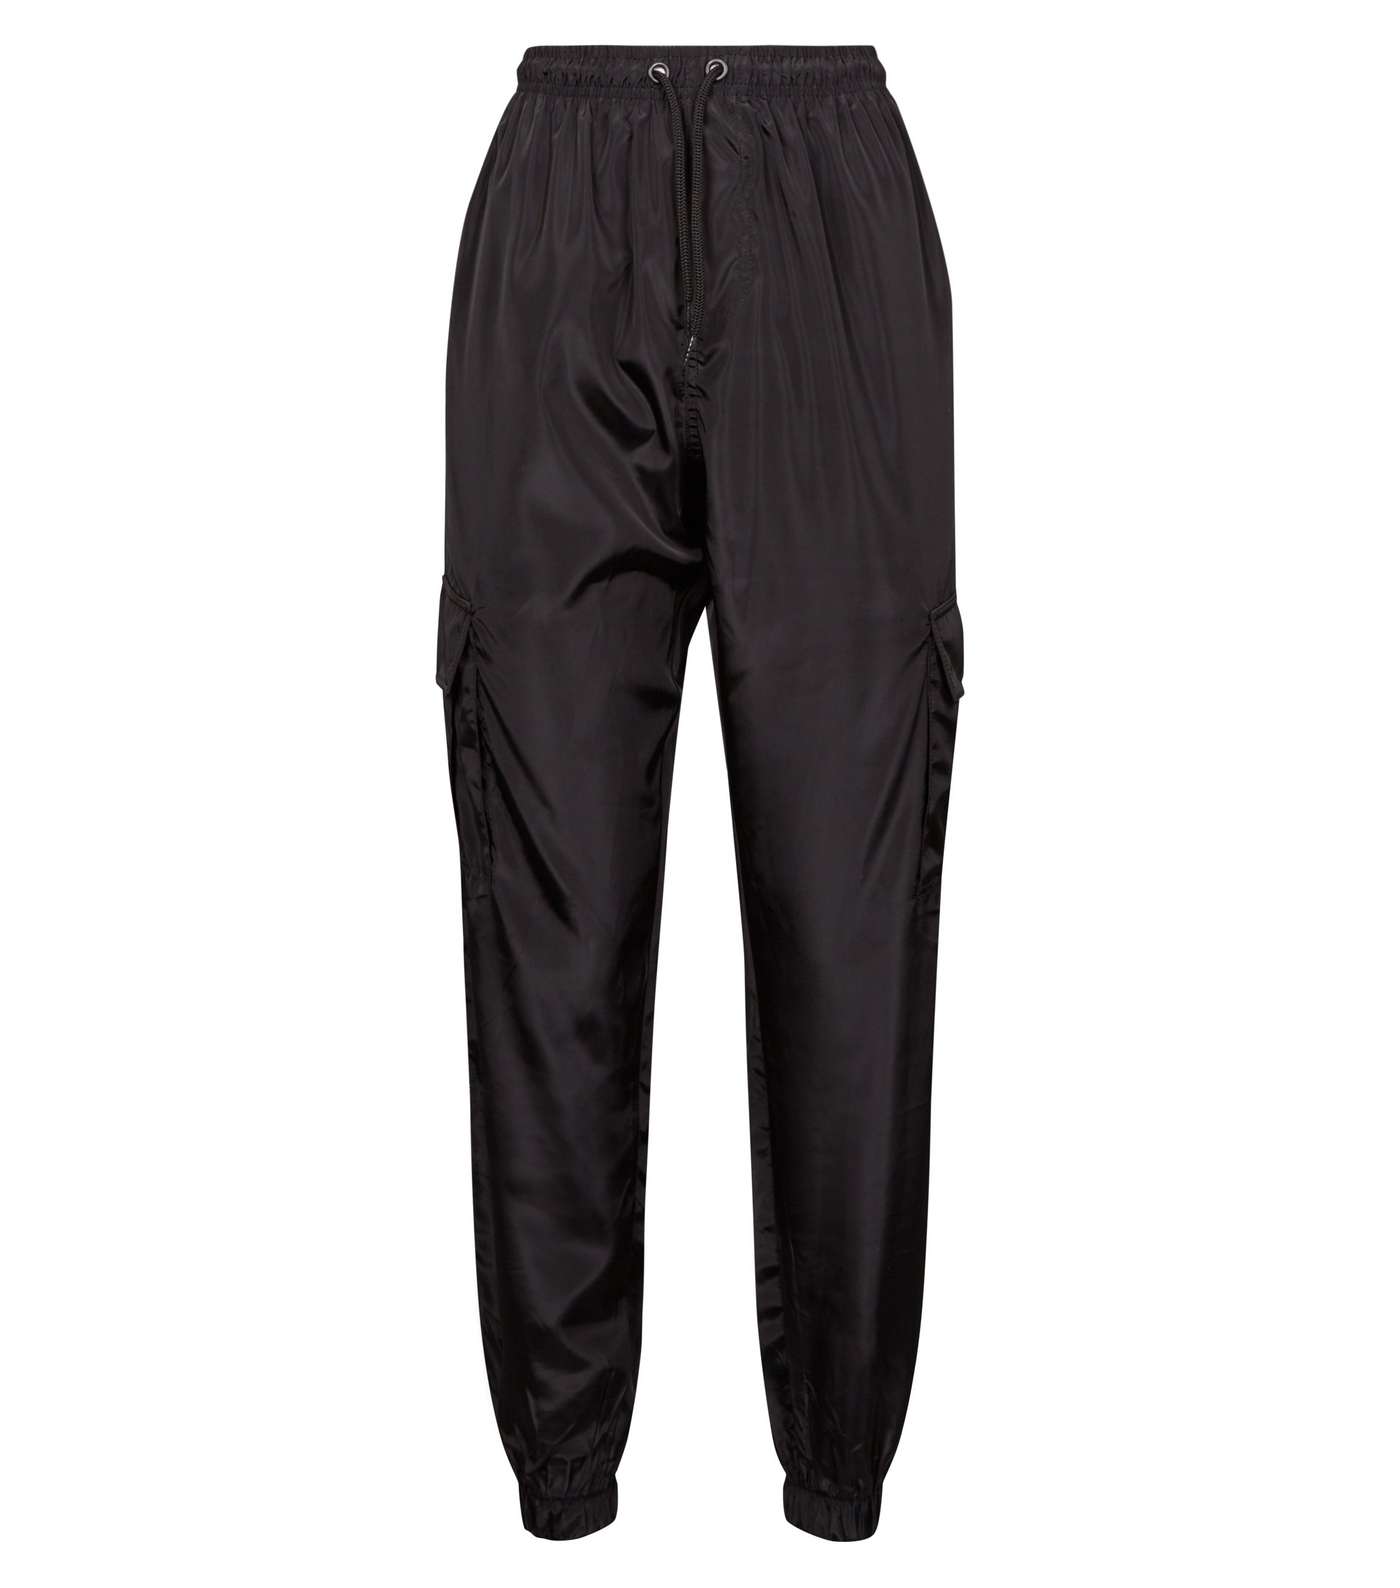 Cameo Rose Black Cuffed Utility Trousers Image 4